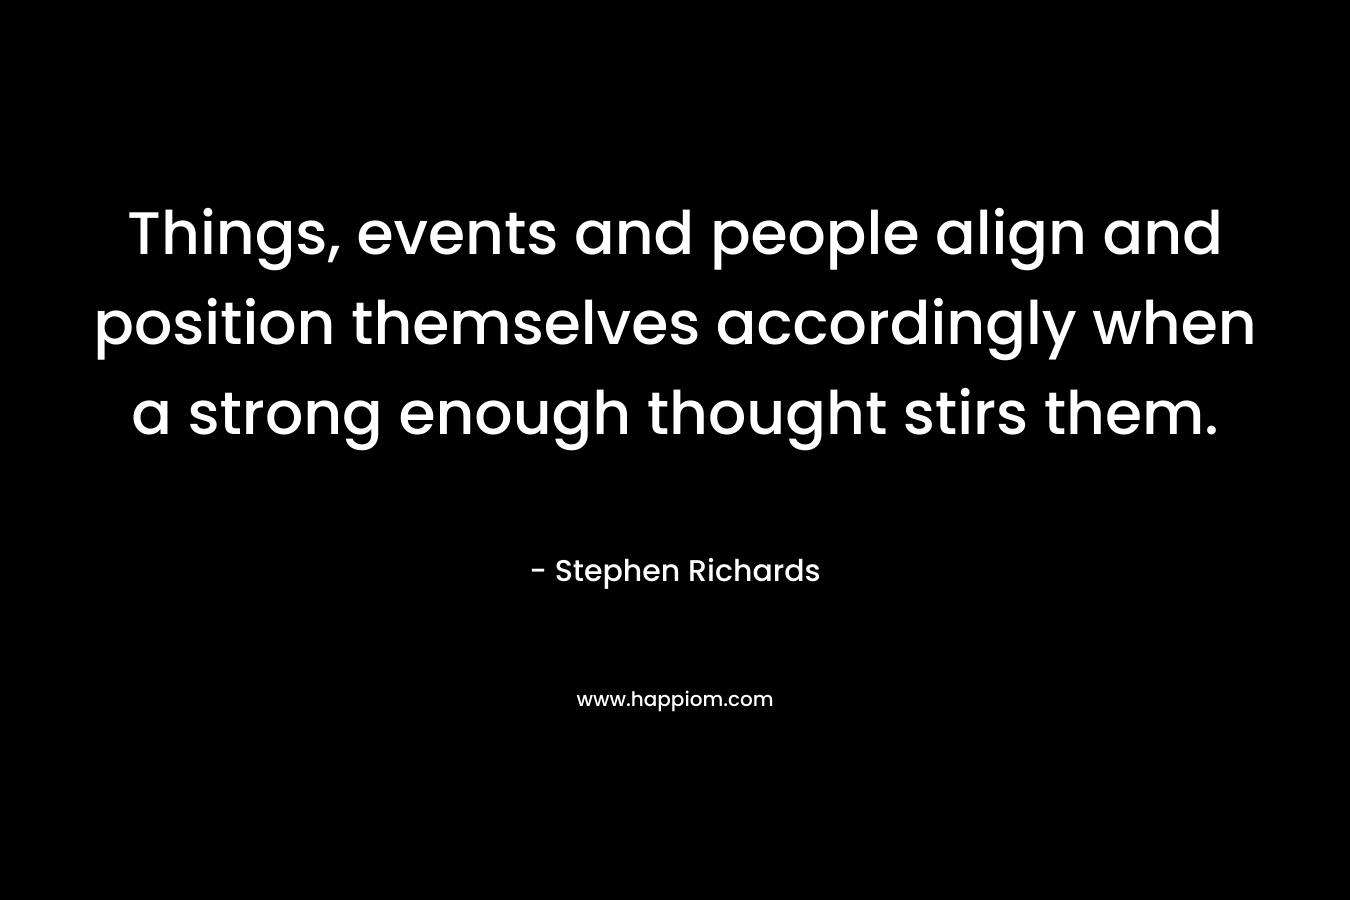 Things, events and people align and position themselves accordingly when a strong enough thought stirs them. – Stephen Richards